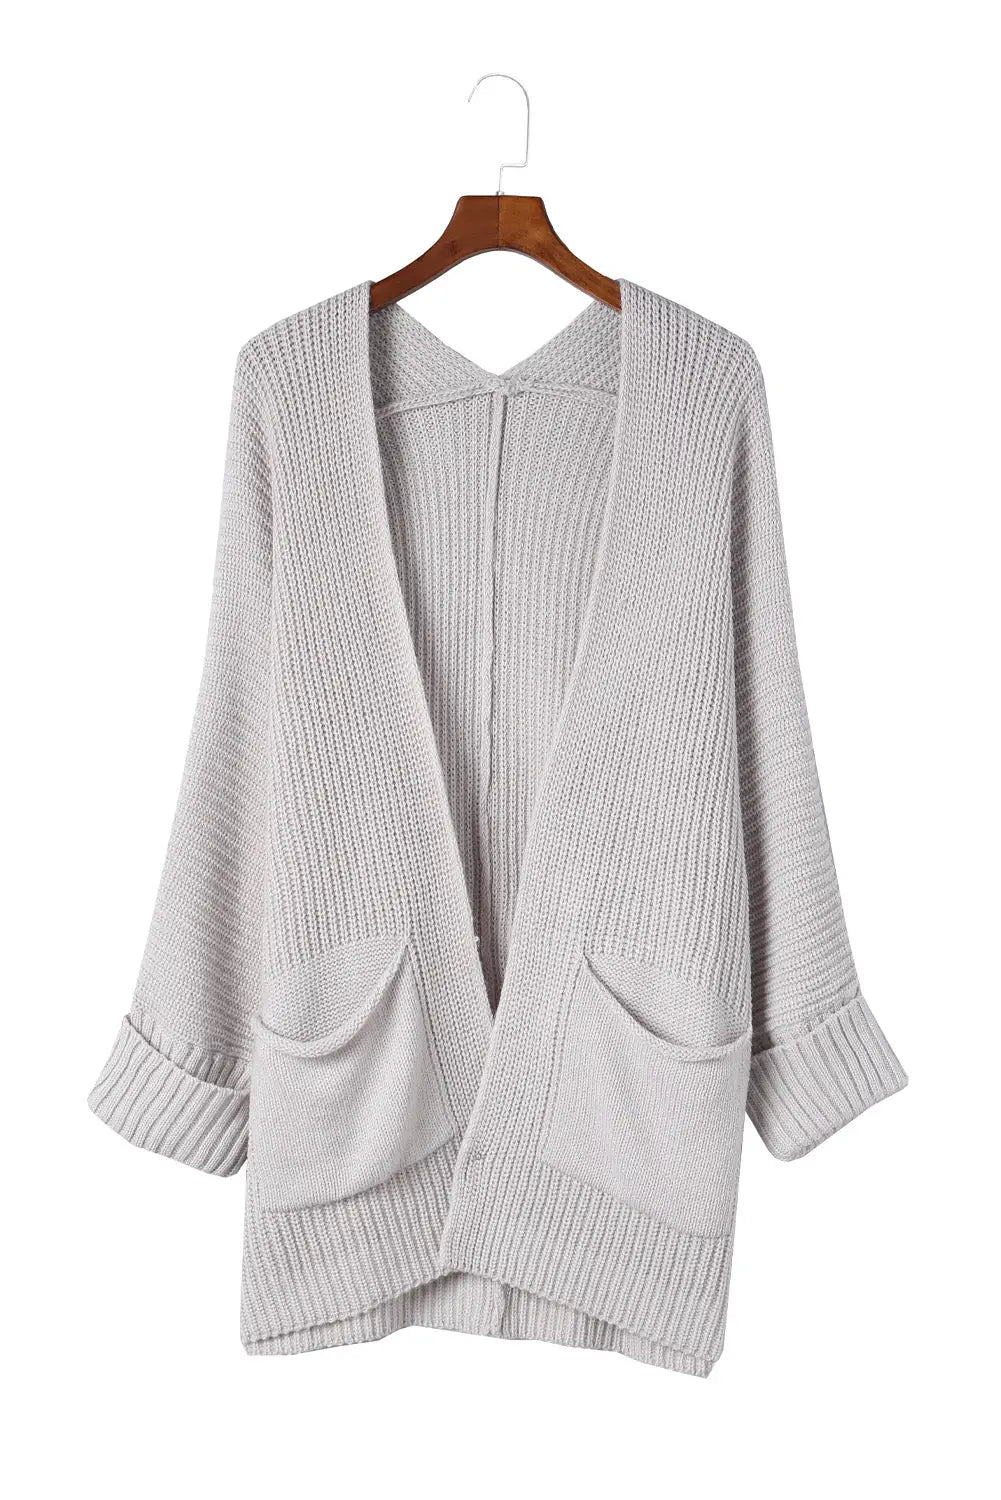 Apricot oversized fold over sleeve sweater cardigan - tops